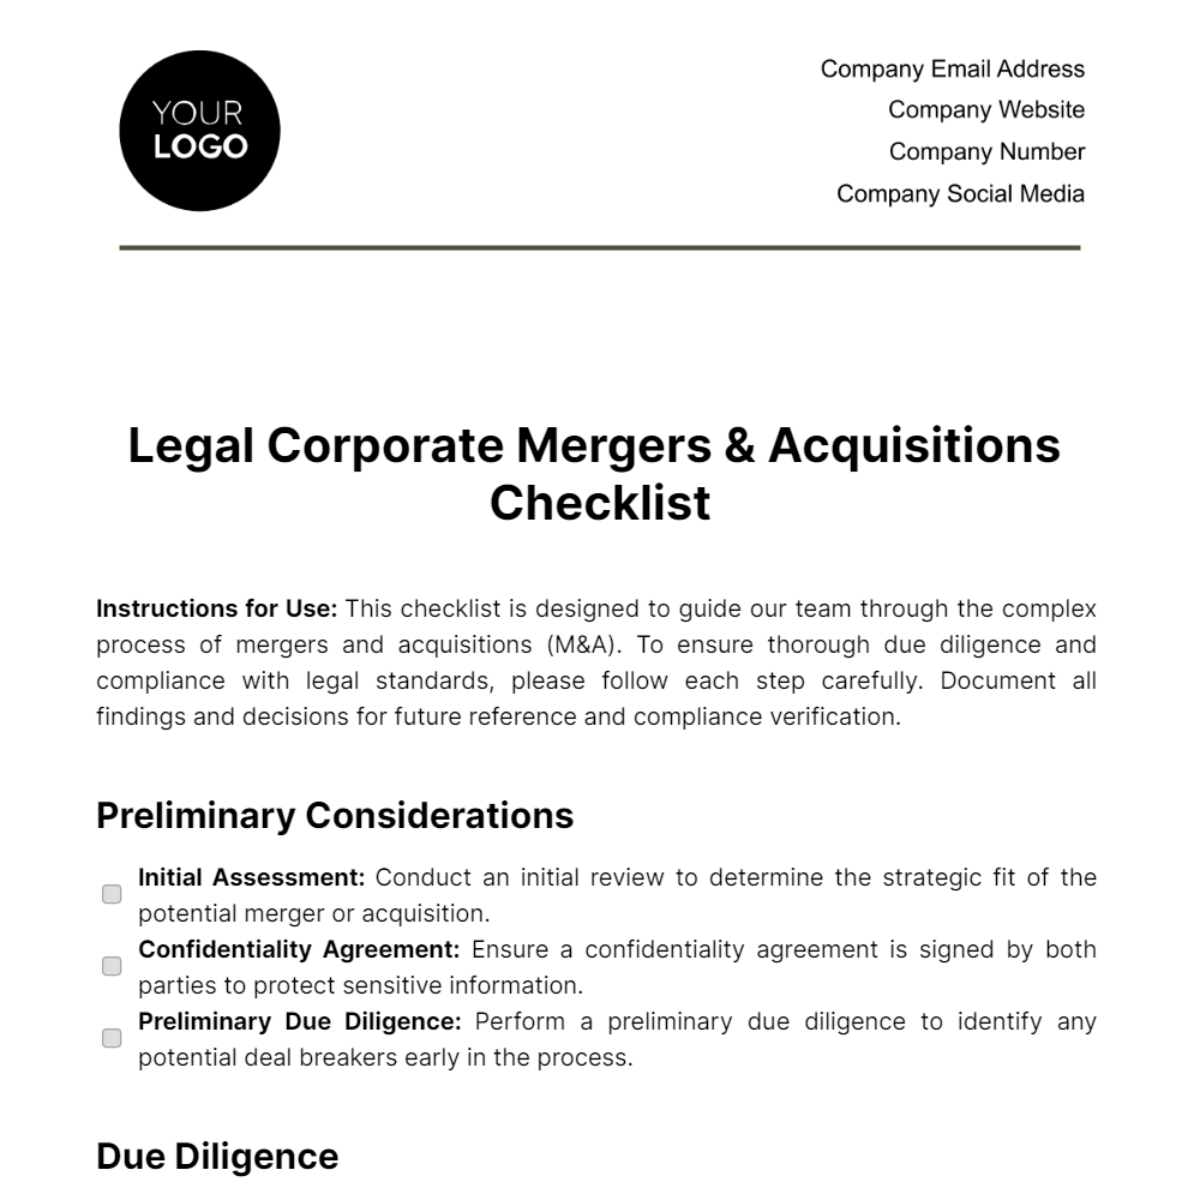 Free Legal Corporate Mergers & Acquisitions Checklist Template